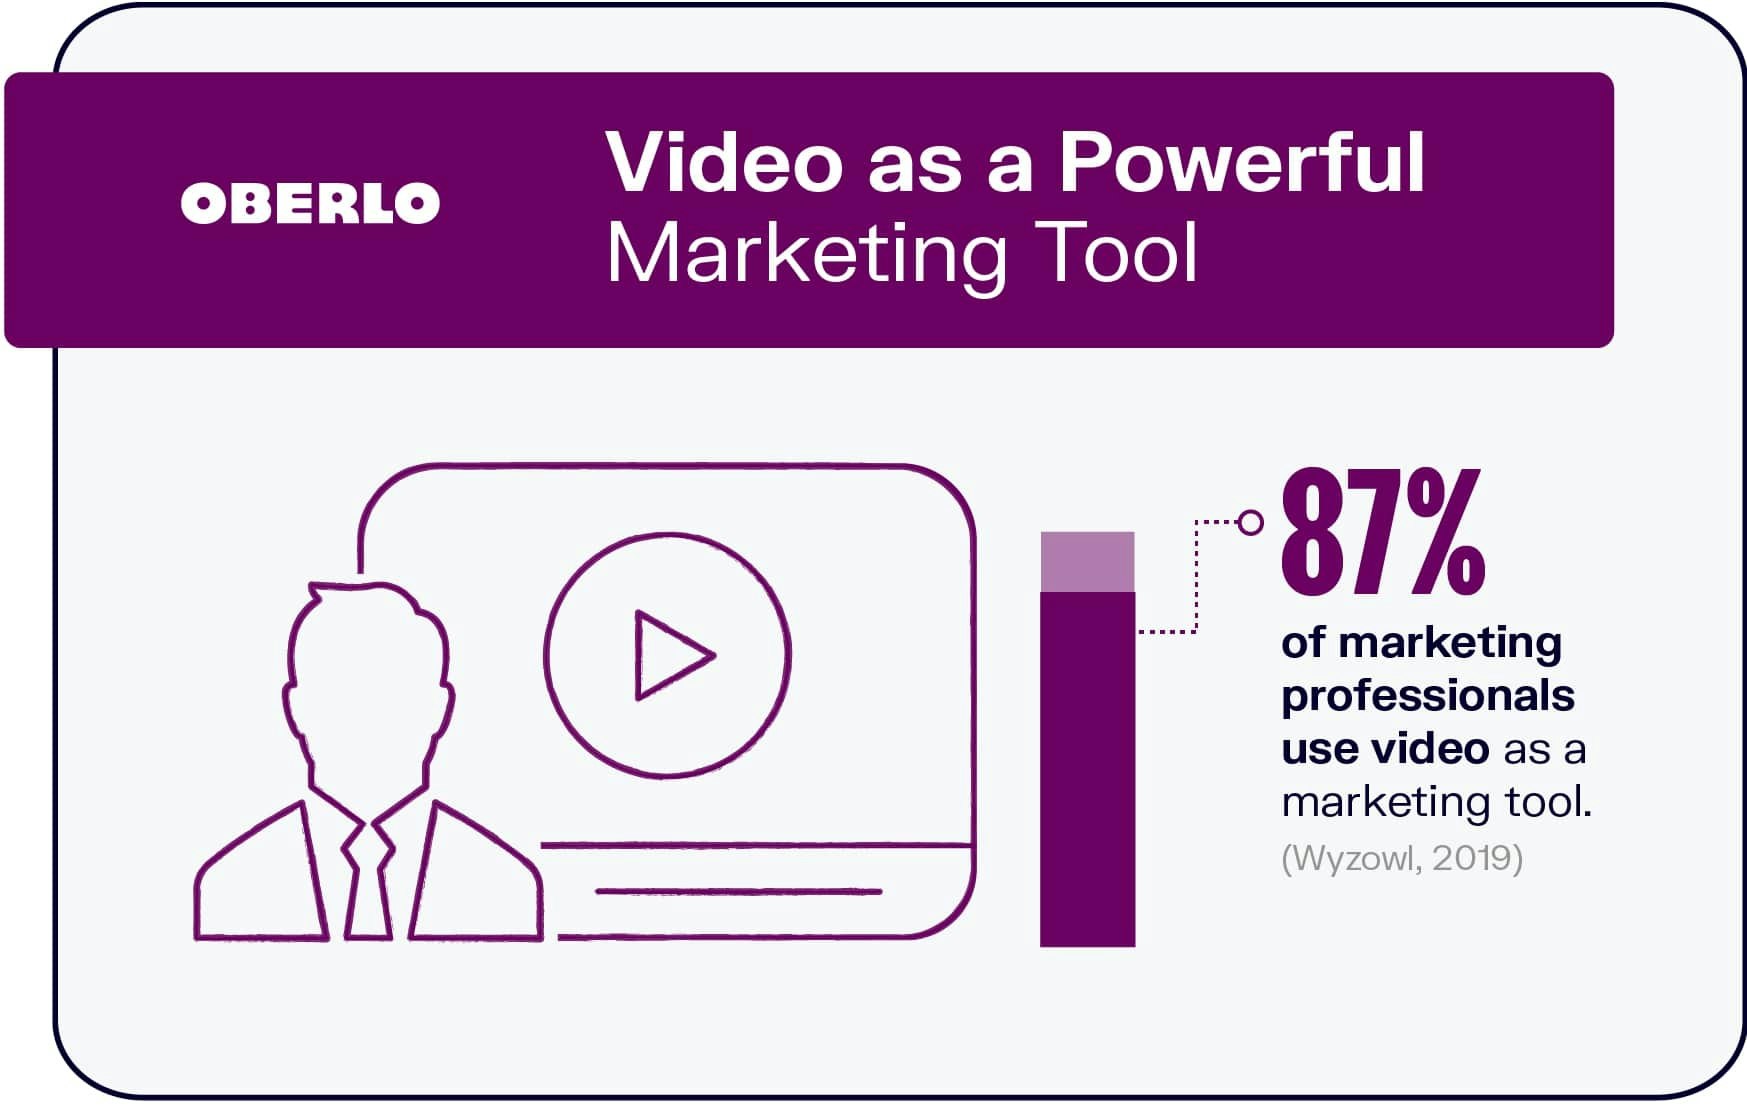 Video as a Powerful Marketing Tool